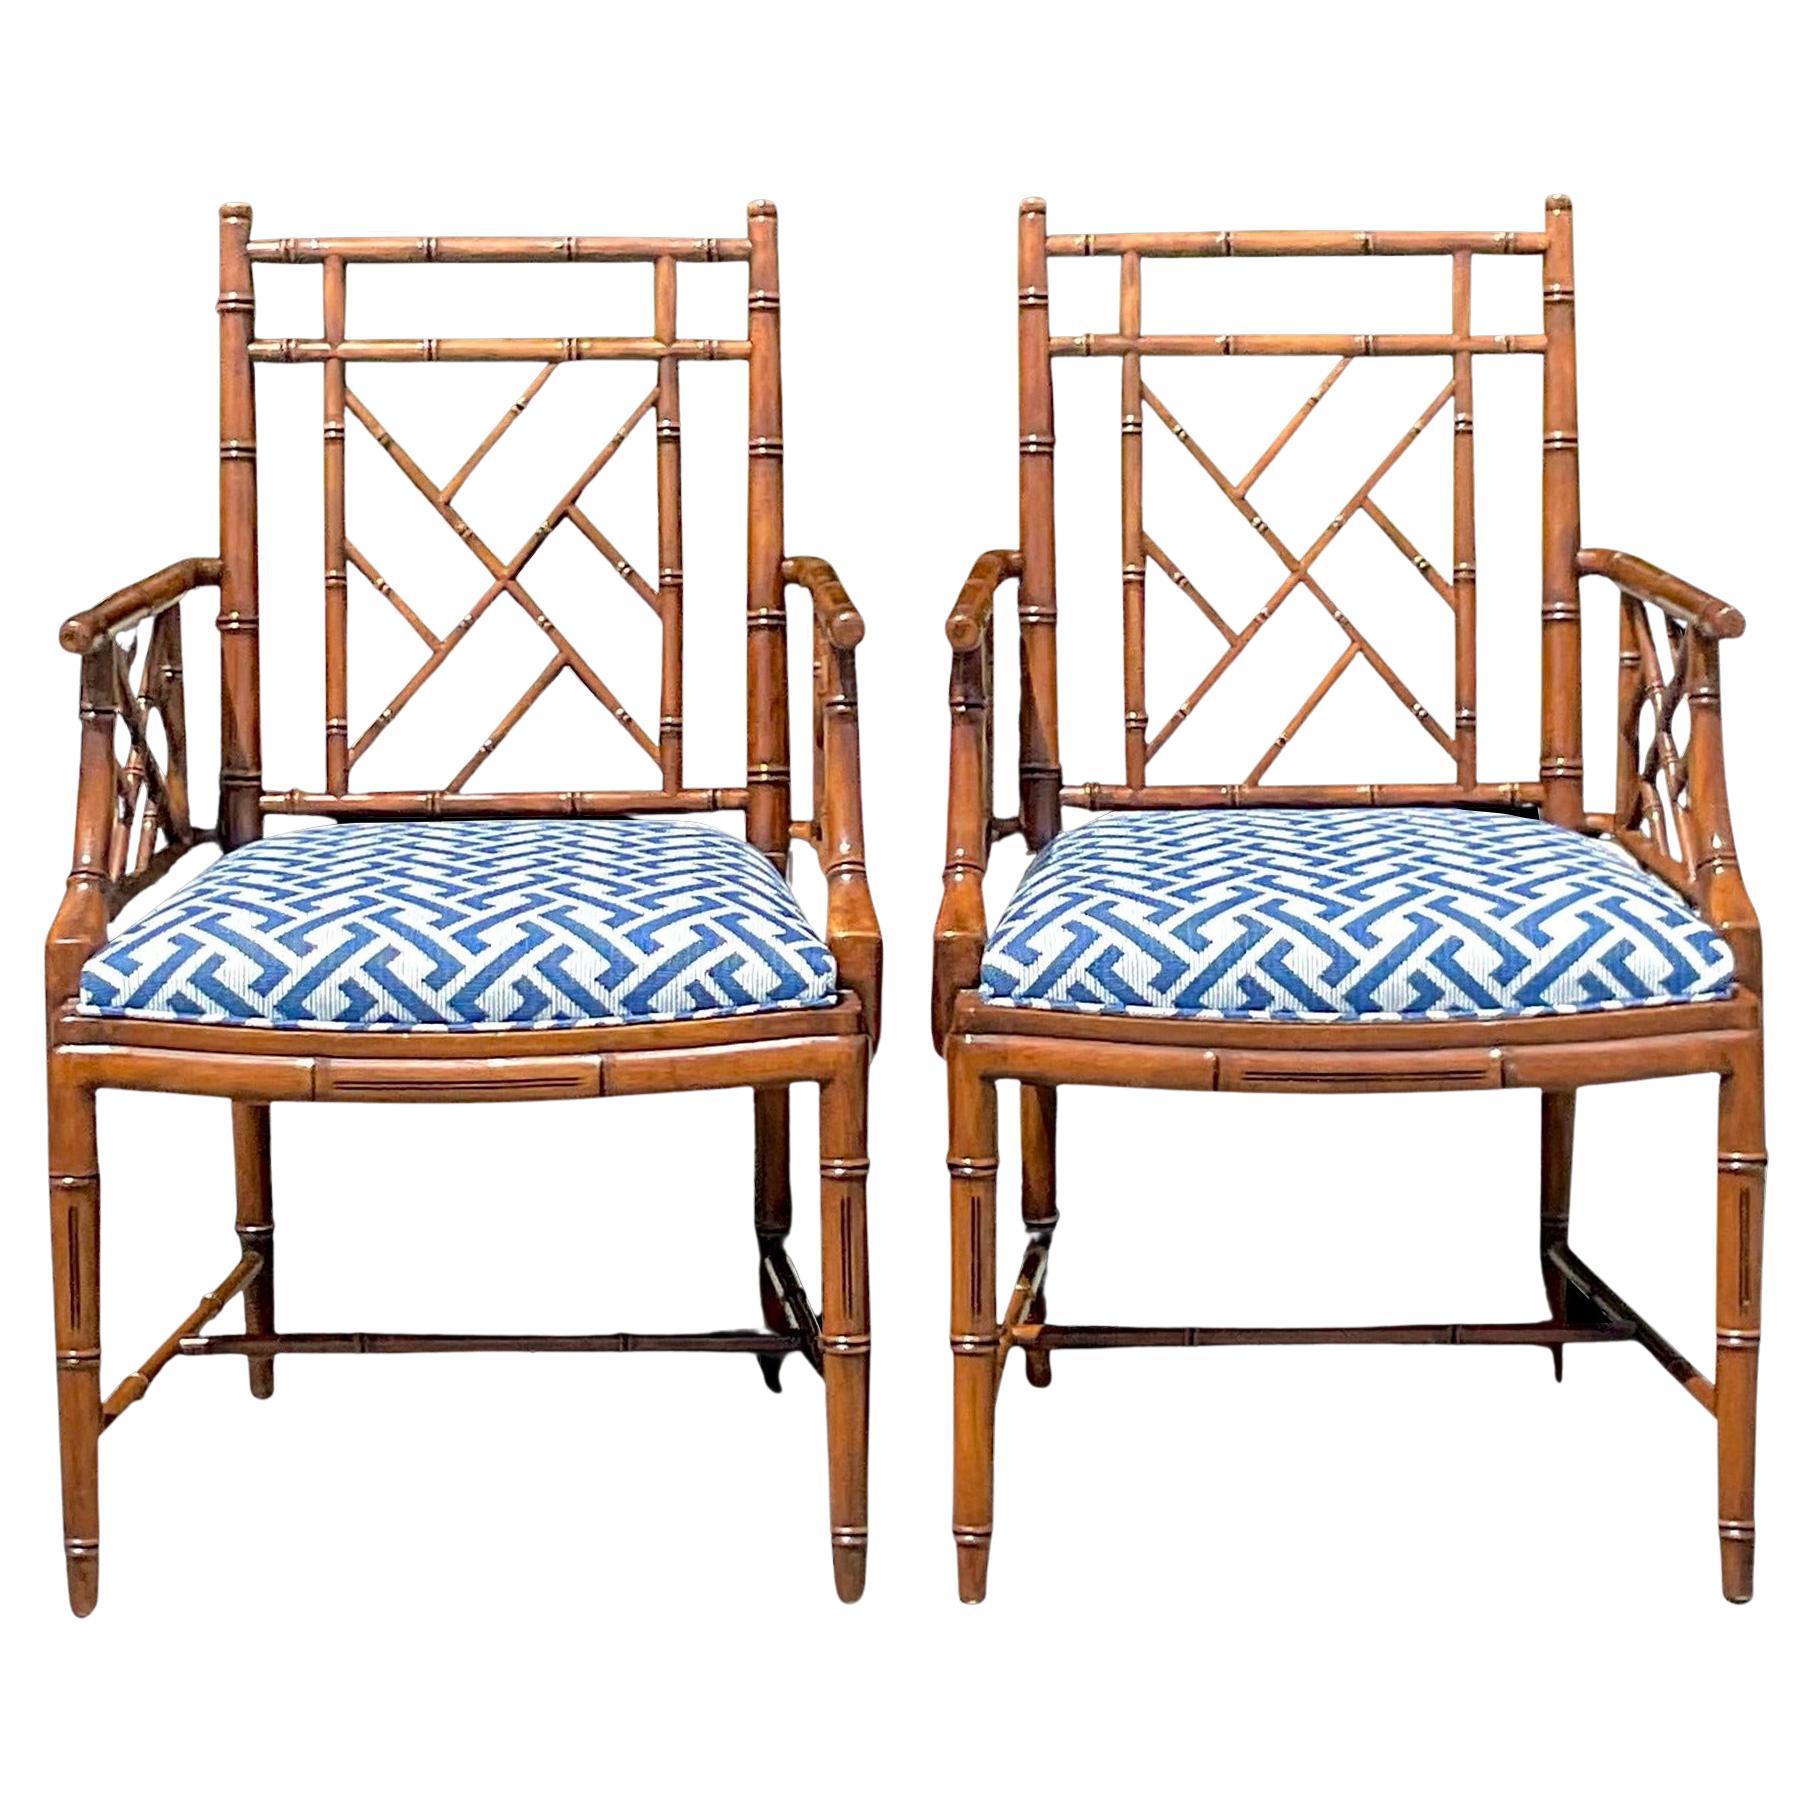 Vintage Regency William Switzer Chinese Chippendale Arm Chairs - a Pair For Sale